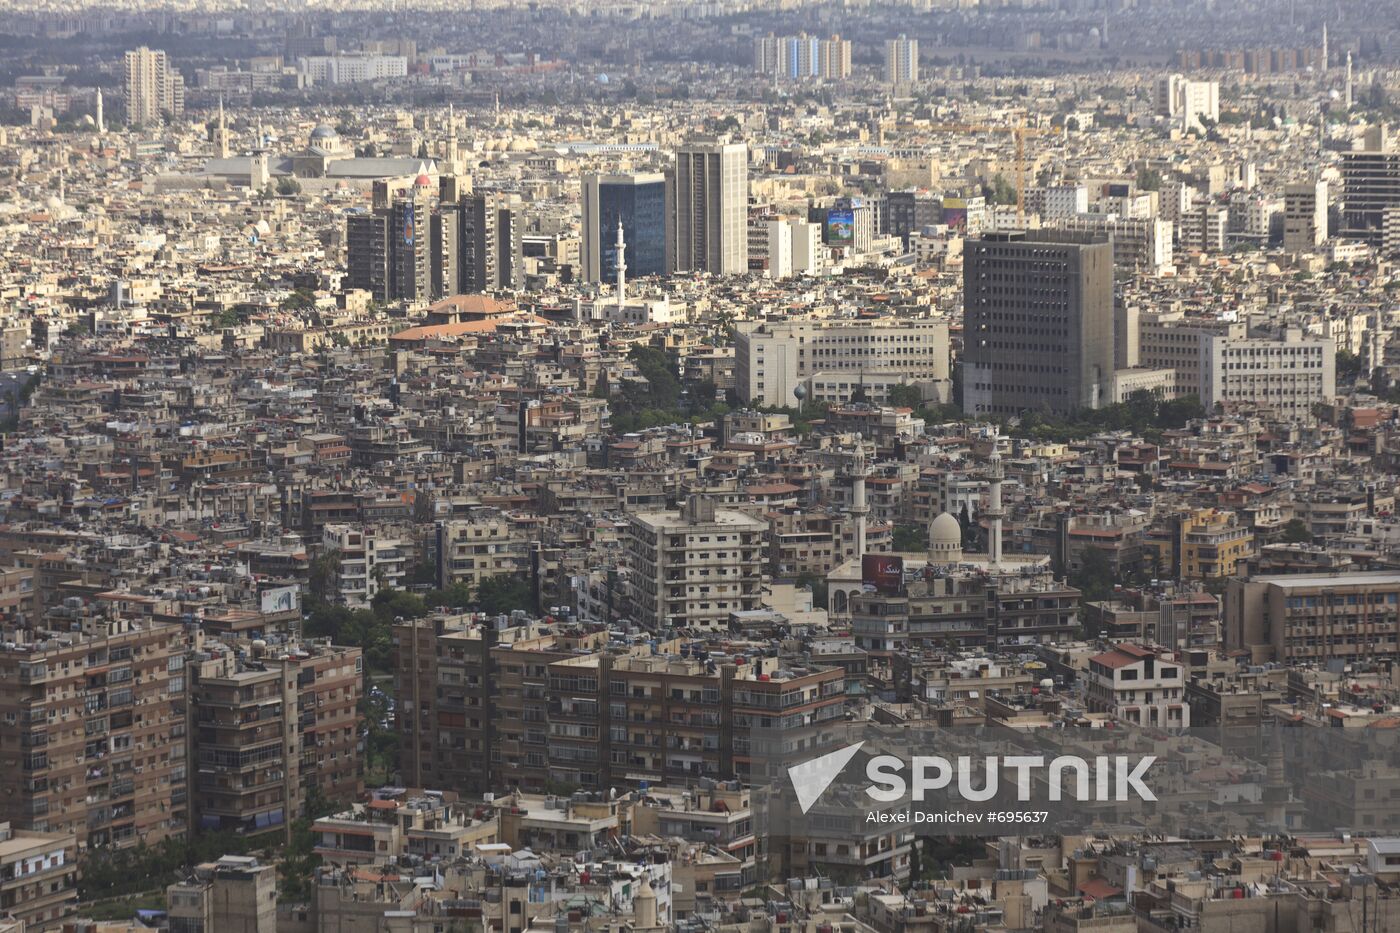 View of Damascus